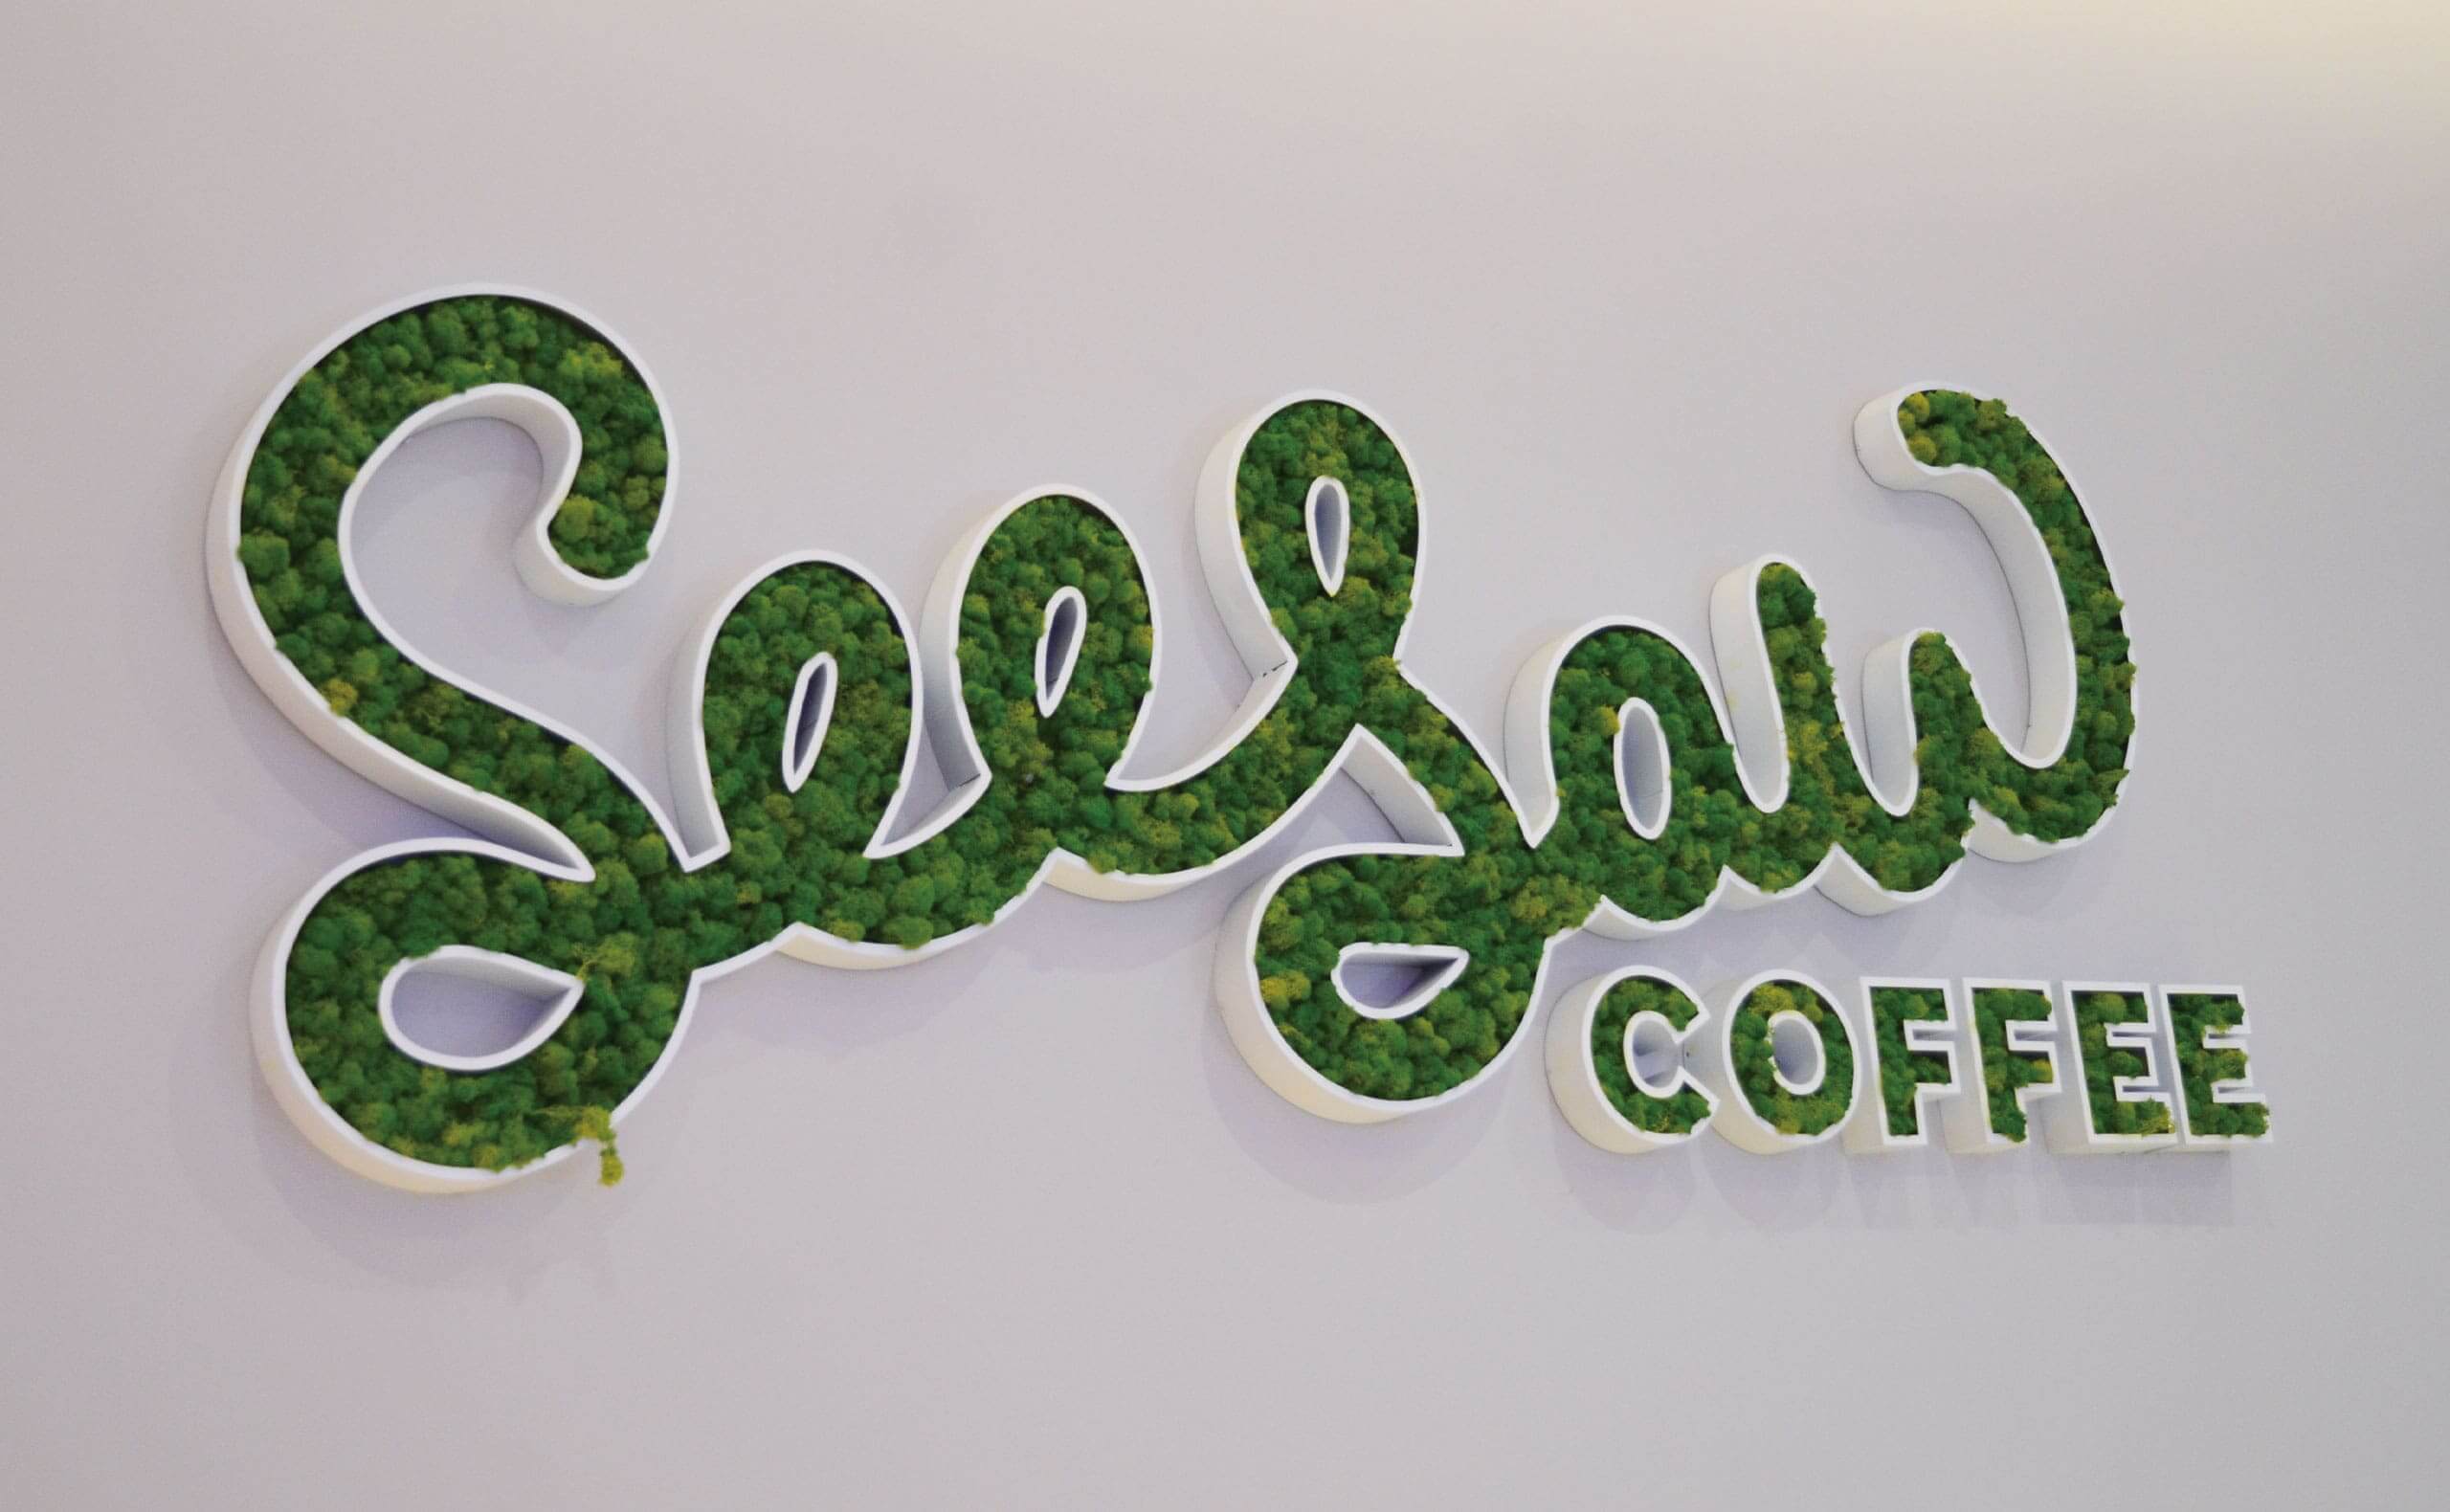 3D Metal Signs For Seesaw Coffee